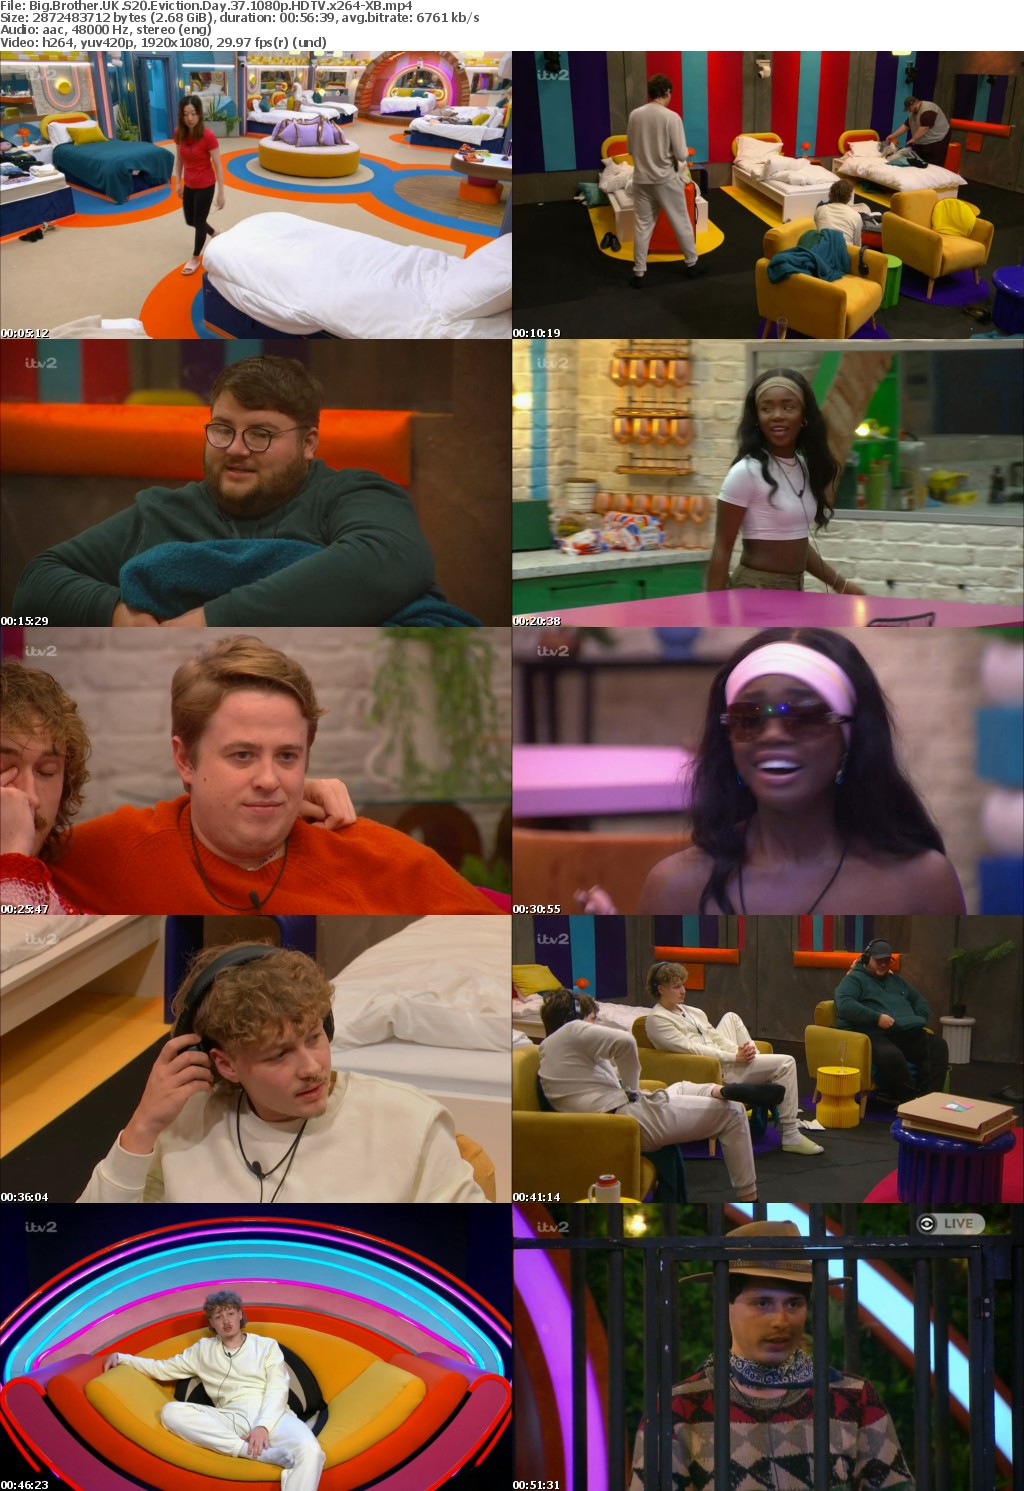 Big Brother UK S20 Eviction Day 37 1080p HDTV x264-XB